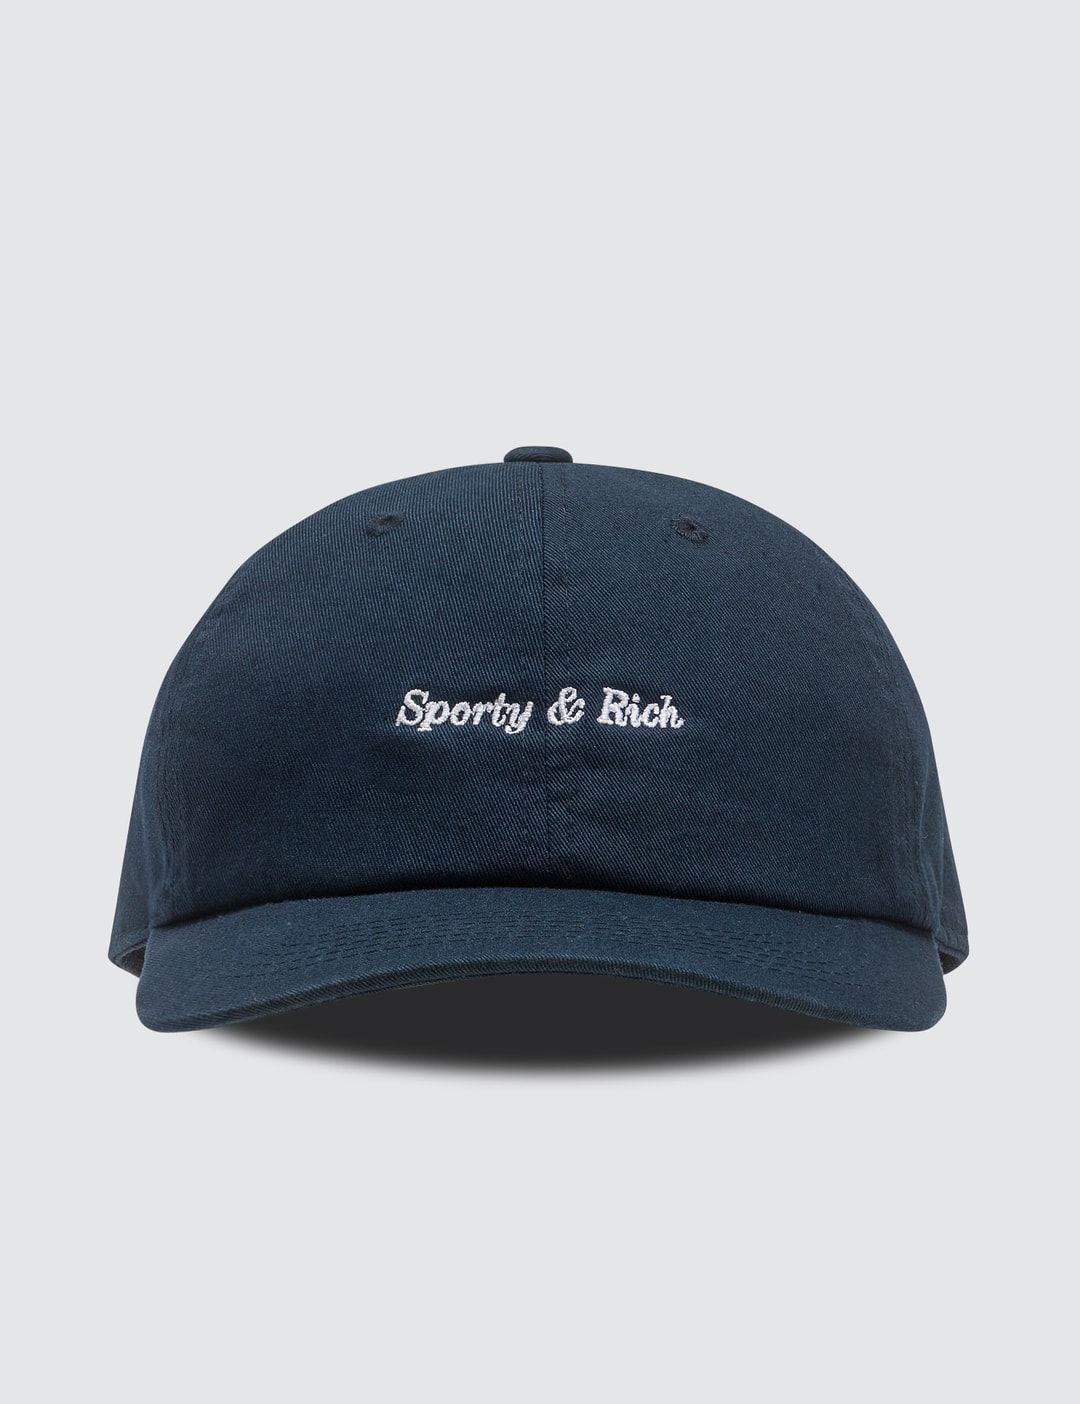 Sporty & Rich - Classic Logo Cap | HBX - Globally Curated Fashion and ...